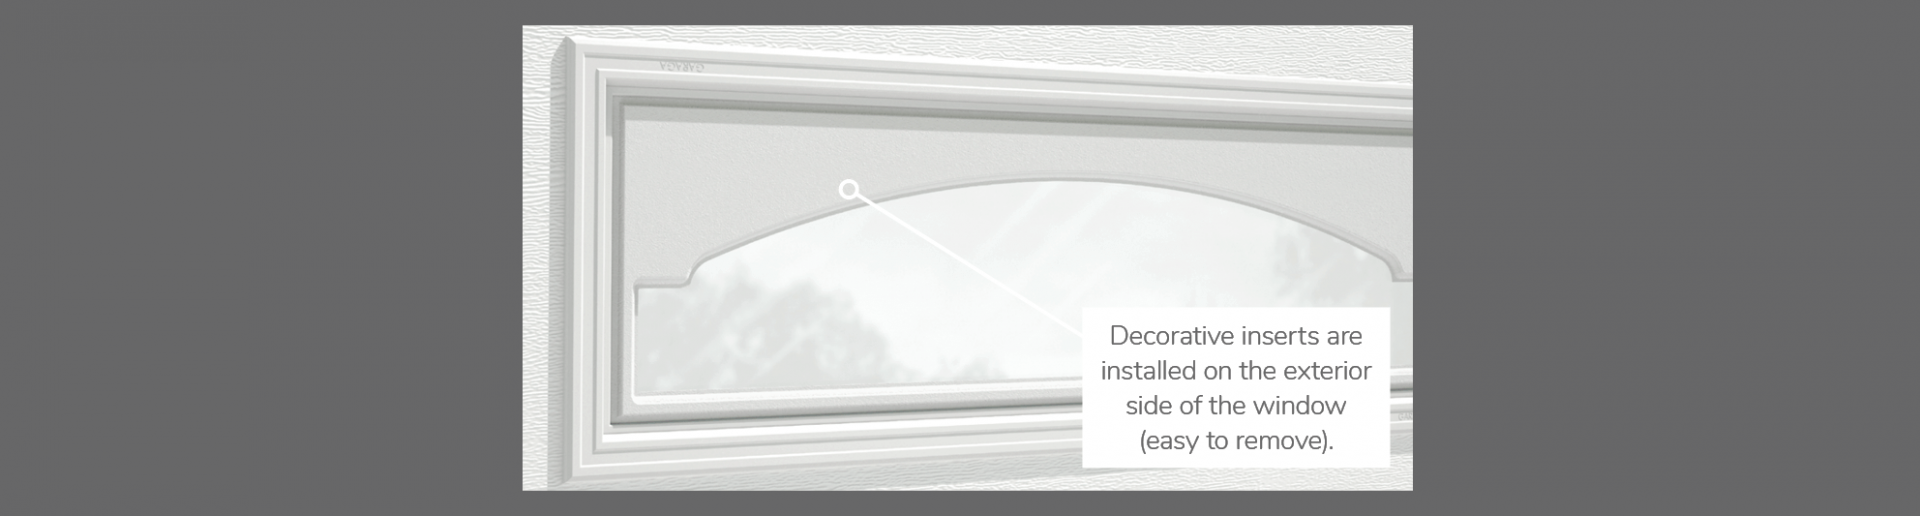 Cathedral Decorative Insert, 40" x 13", available for door R-16 and R-12